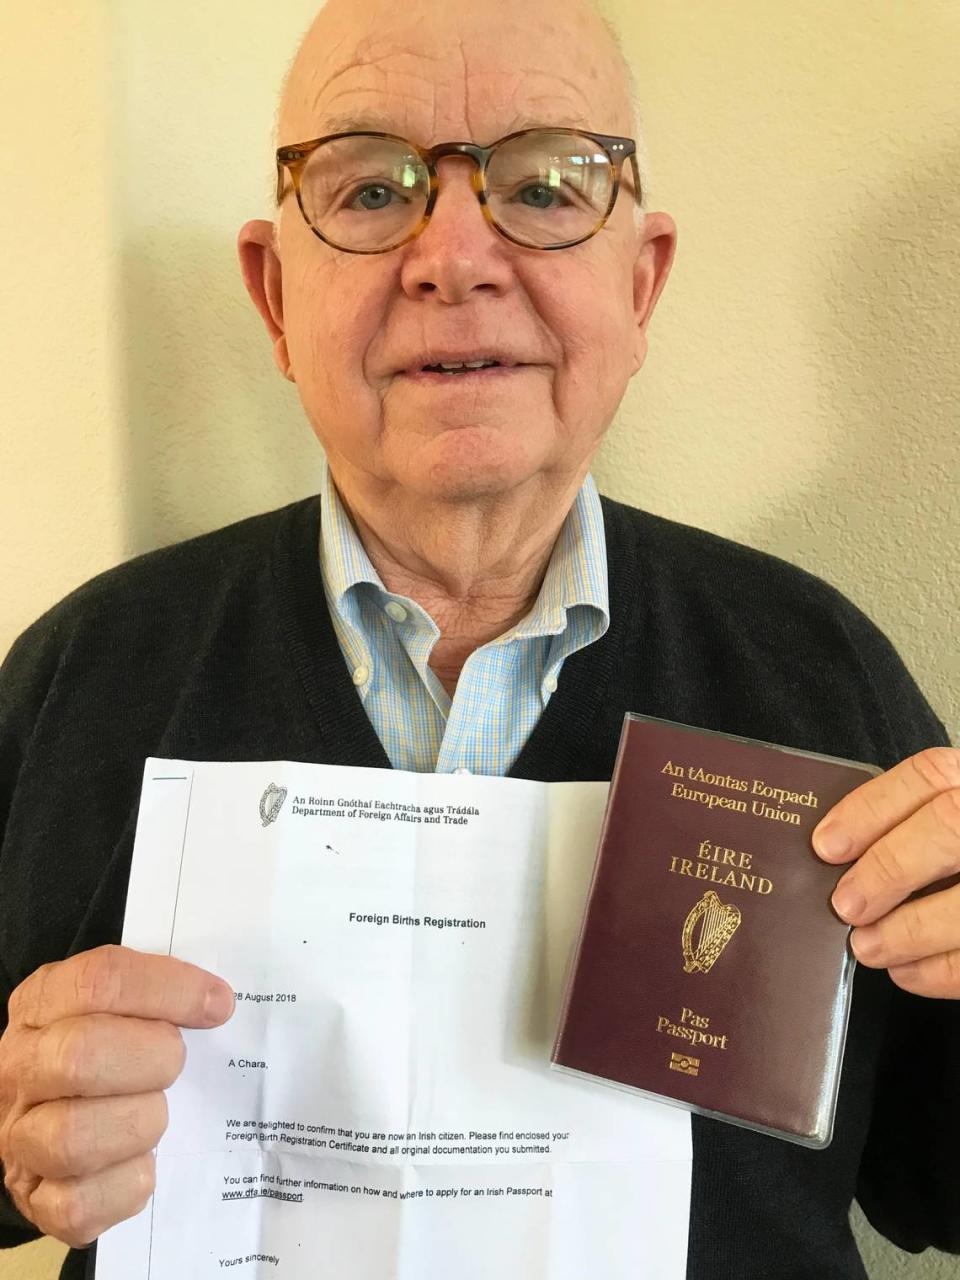 It took two years to achieve, but Mike Lyons of Cambria is a citizen of both the United States and Ireland. He’s holding his Irish citizenship paperwork and his passport.